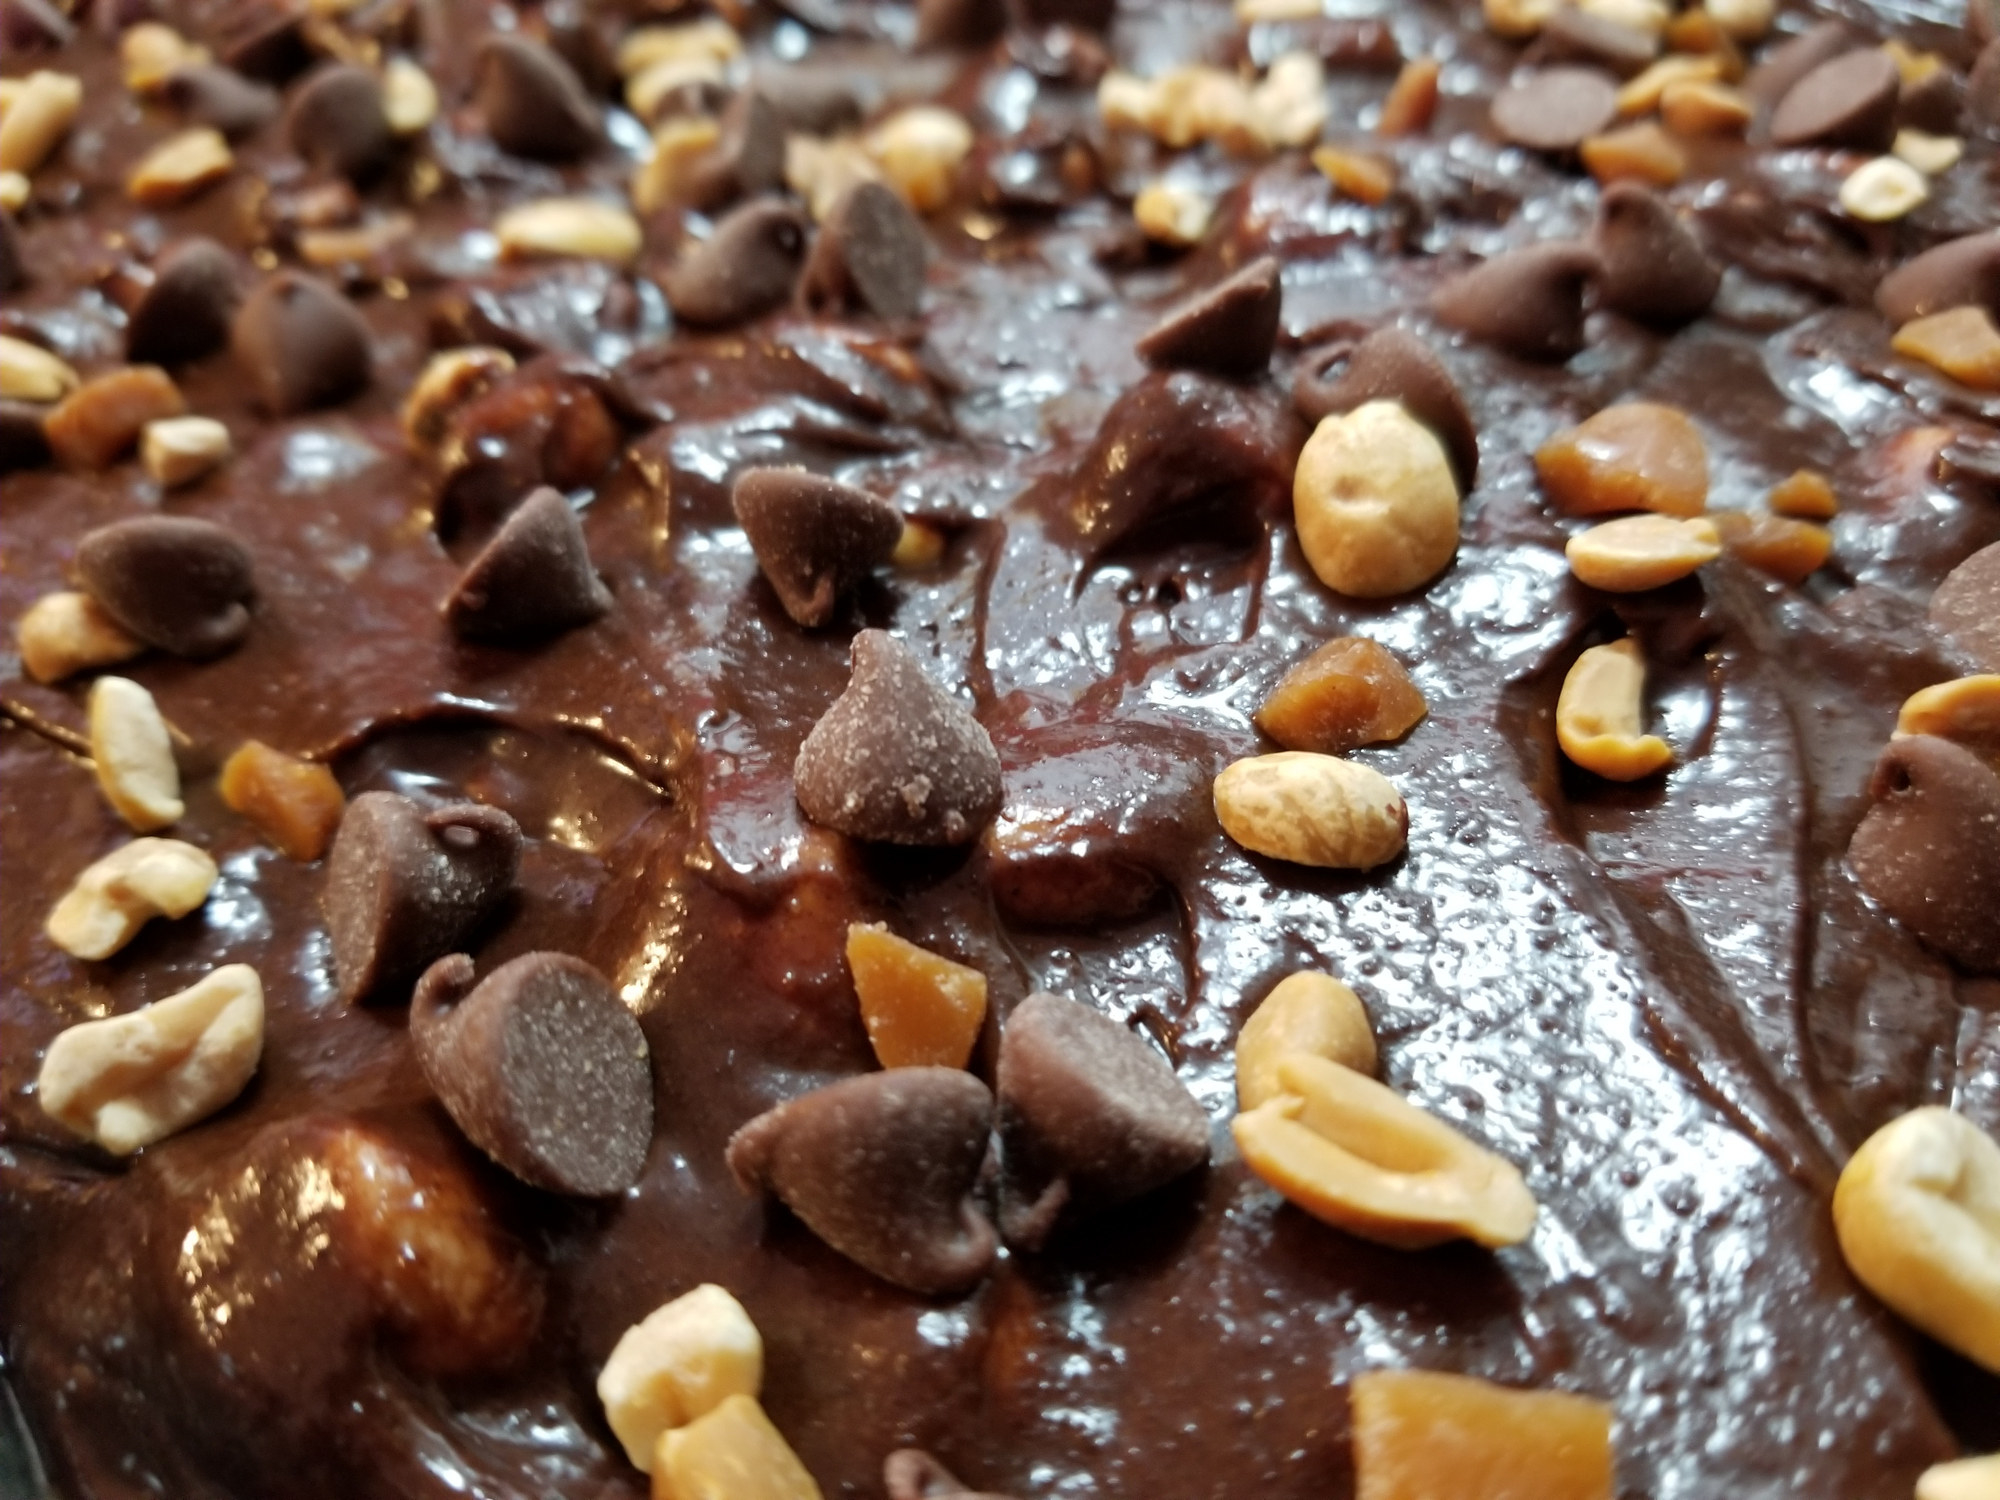 A brownie covered in nuts and chocolate pieces